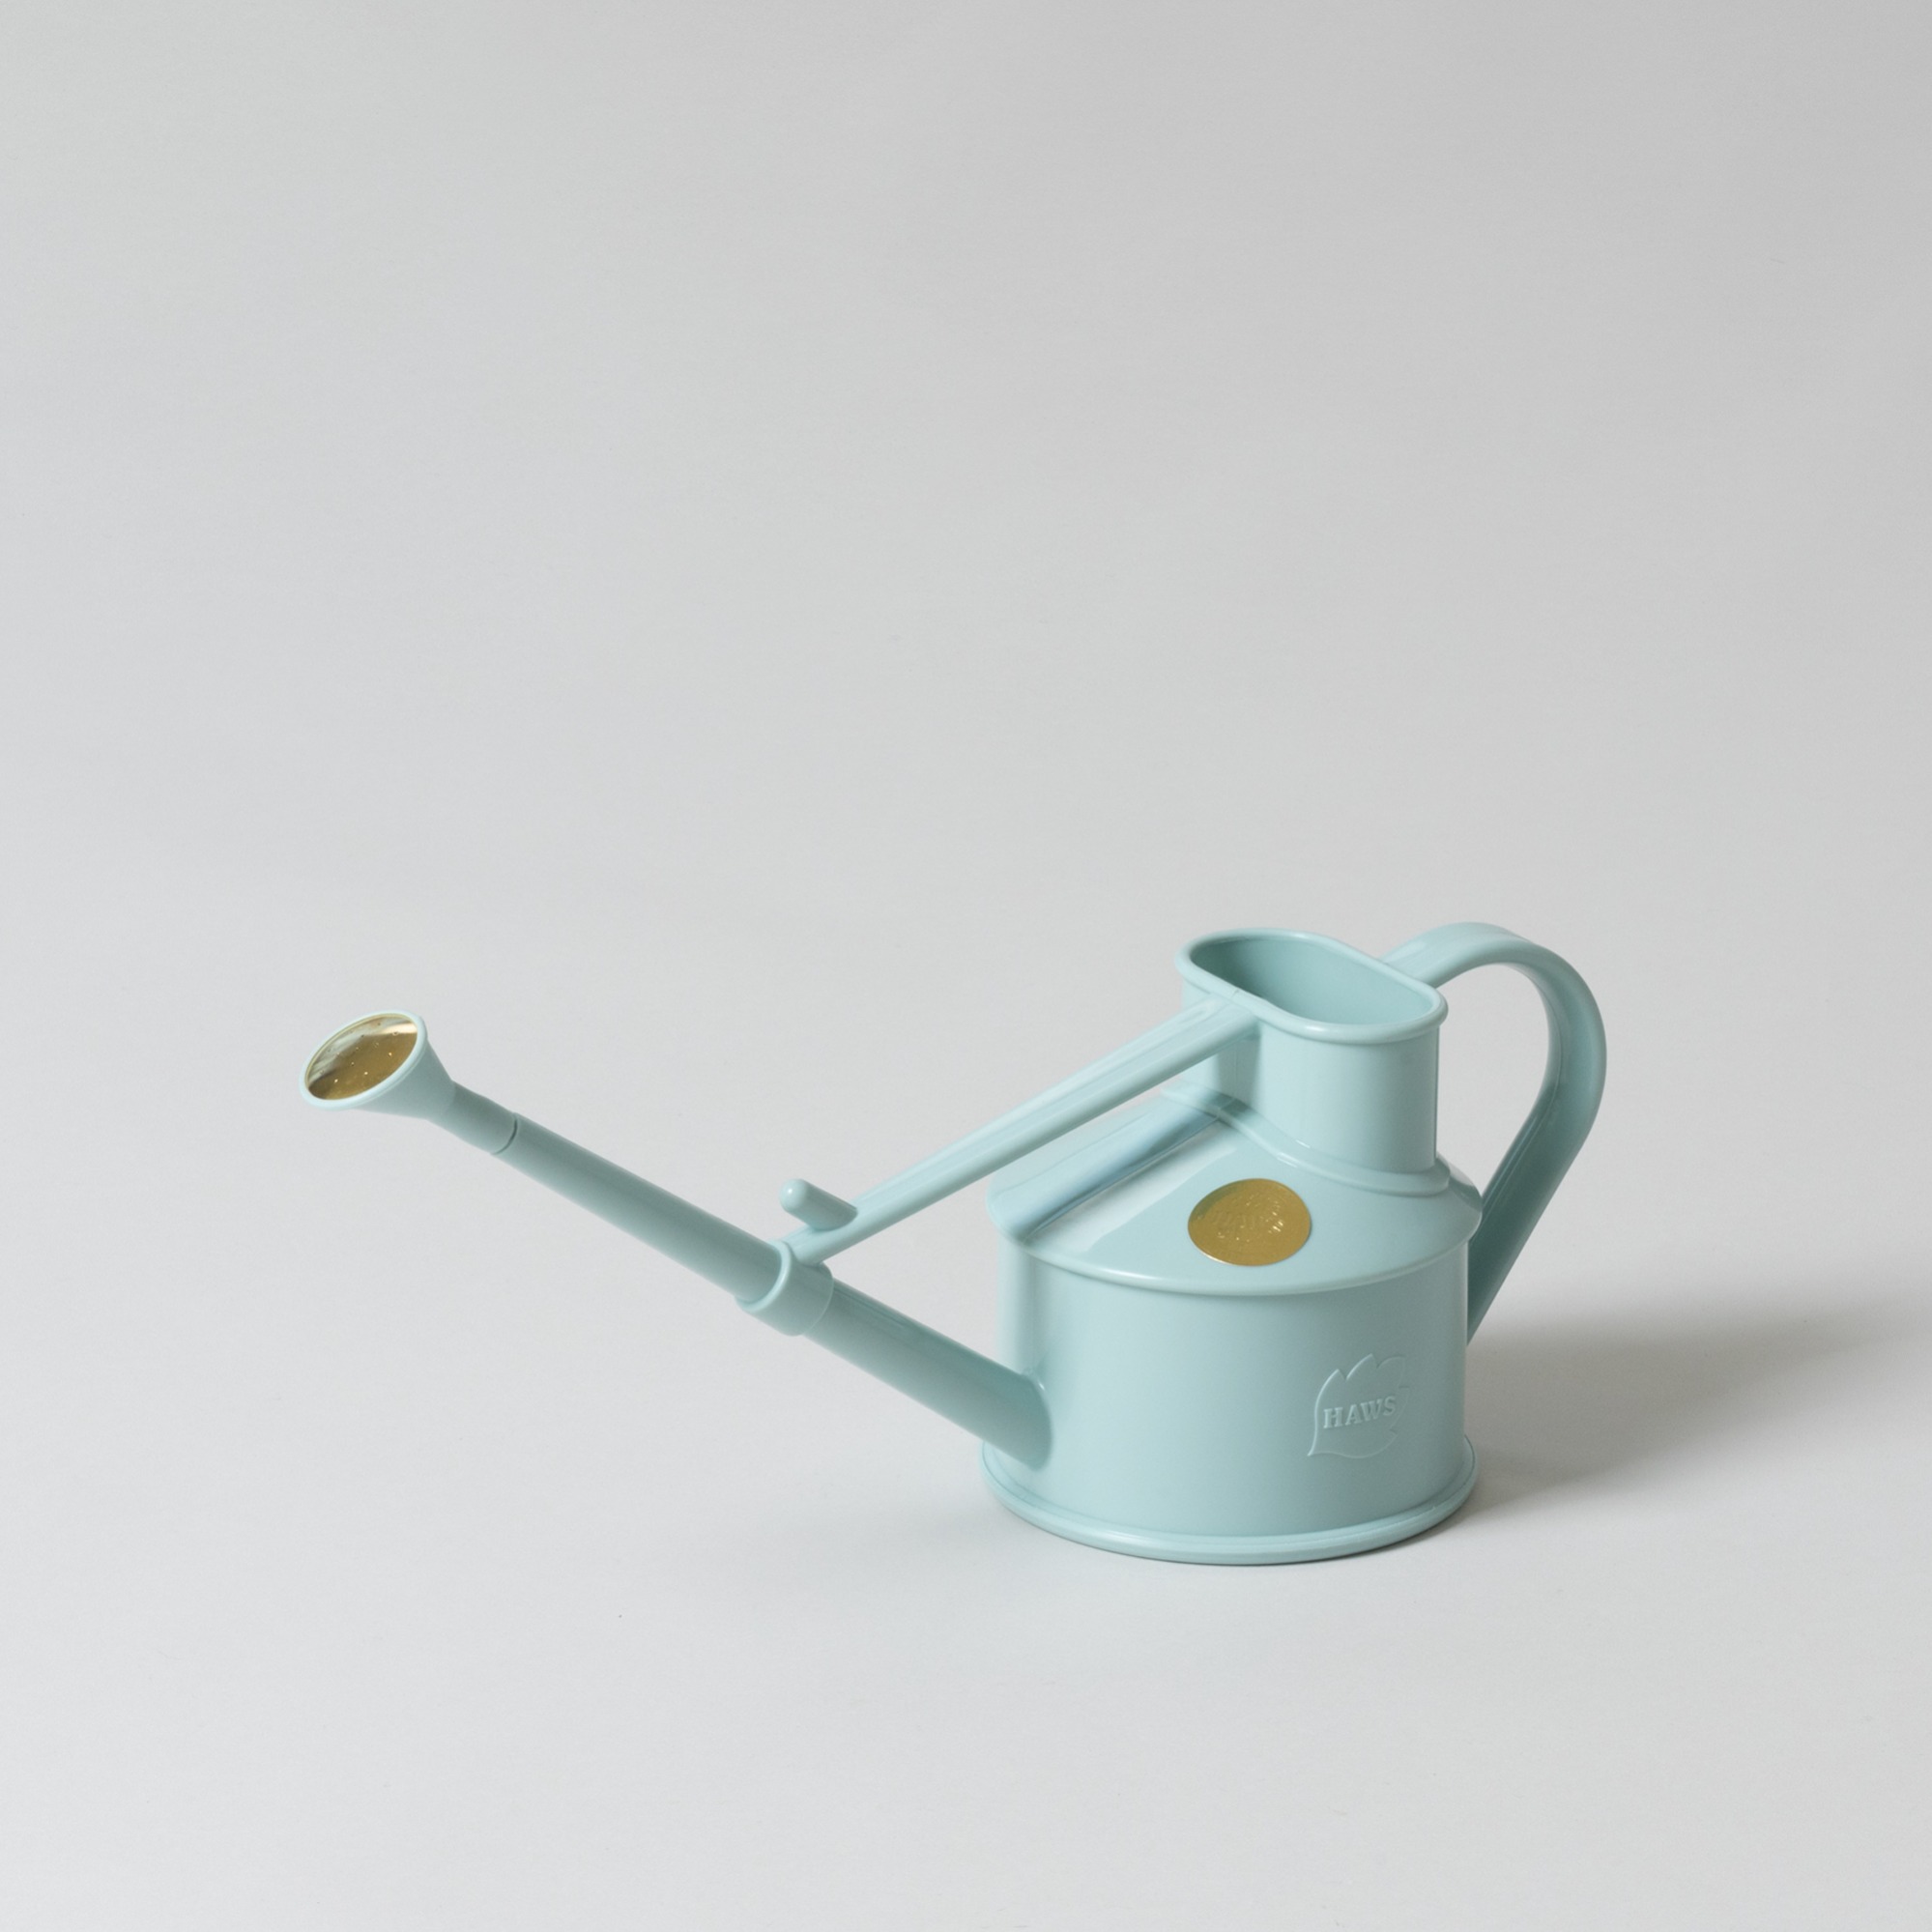 HAWS 0.7L Plastic Watering Can - Sky Blue